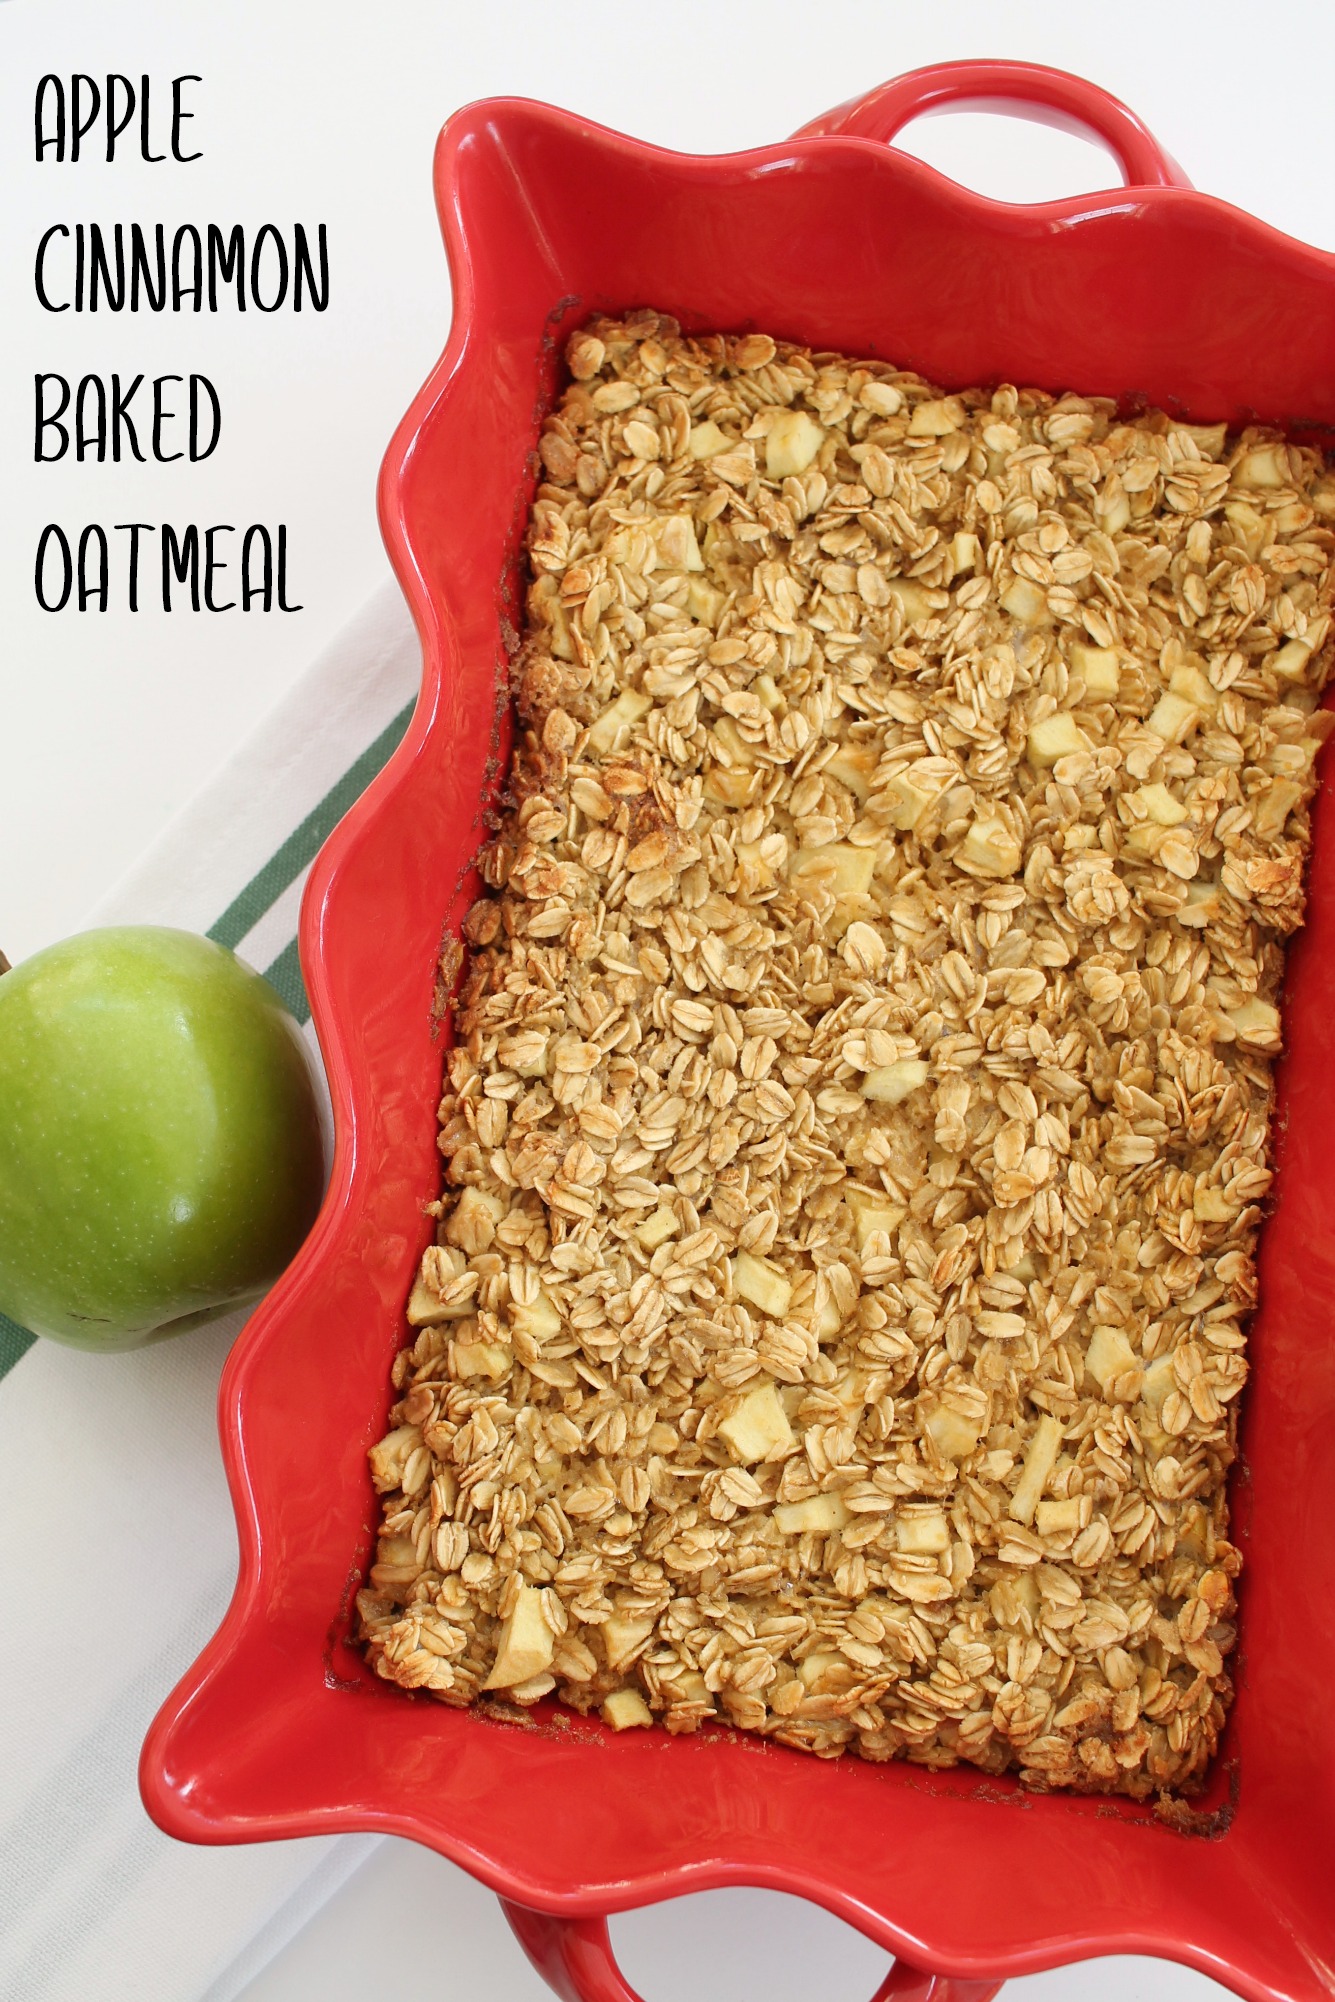 a red rectangle dish filled with apple cinnamon baked oatmeal with a green apple sitting beside it